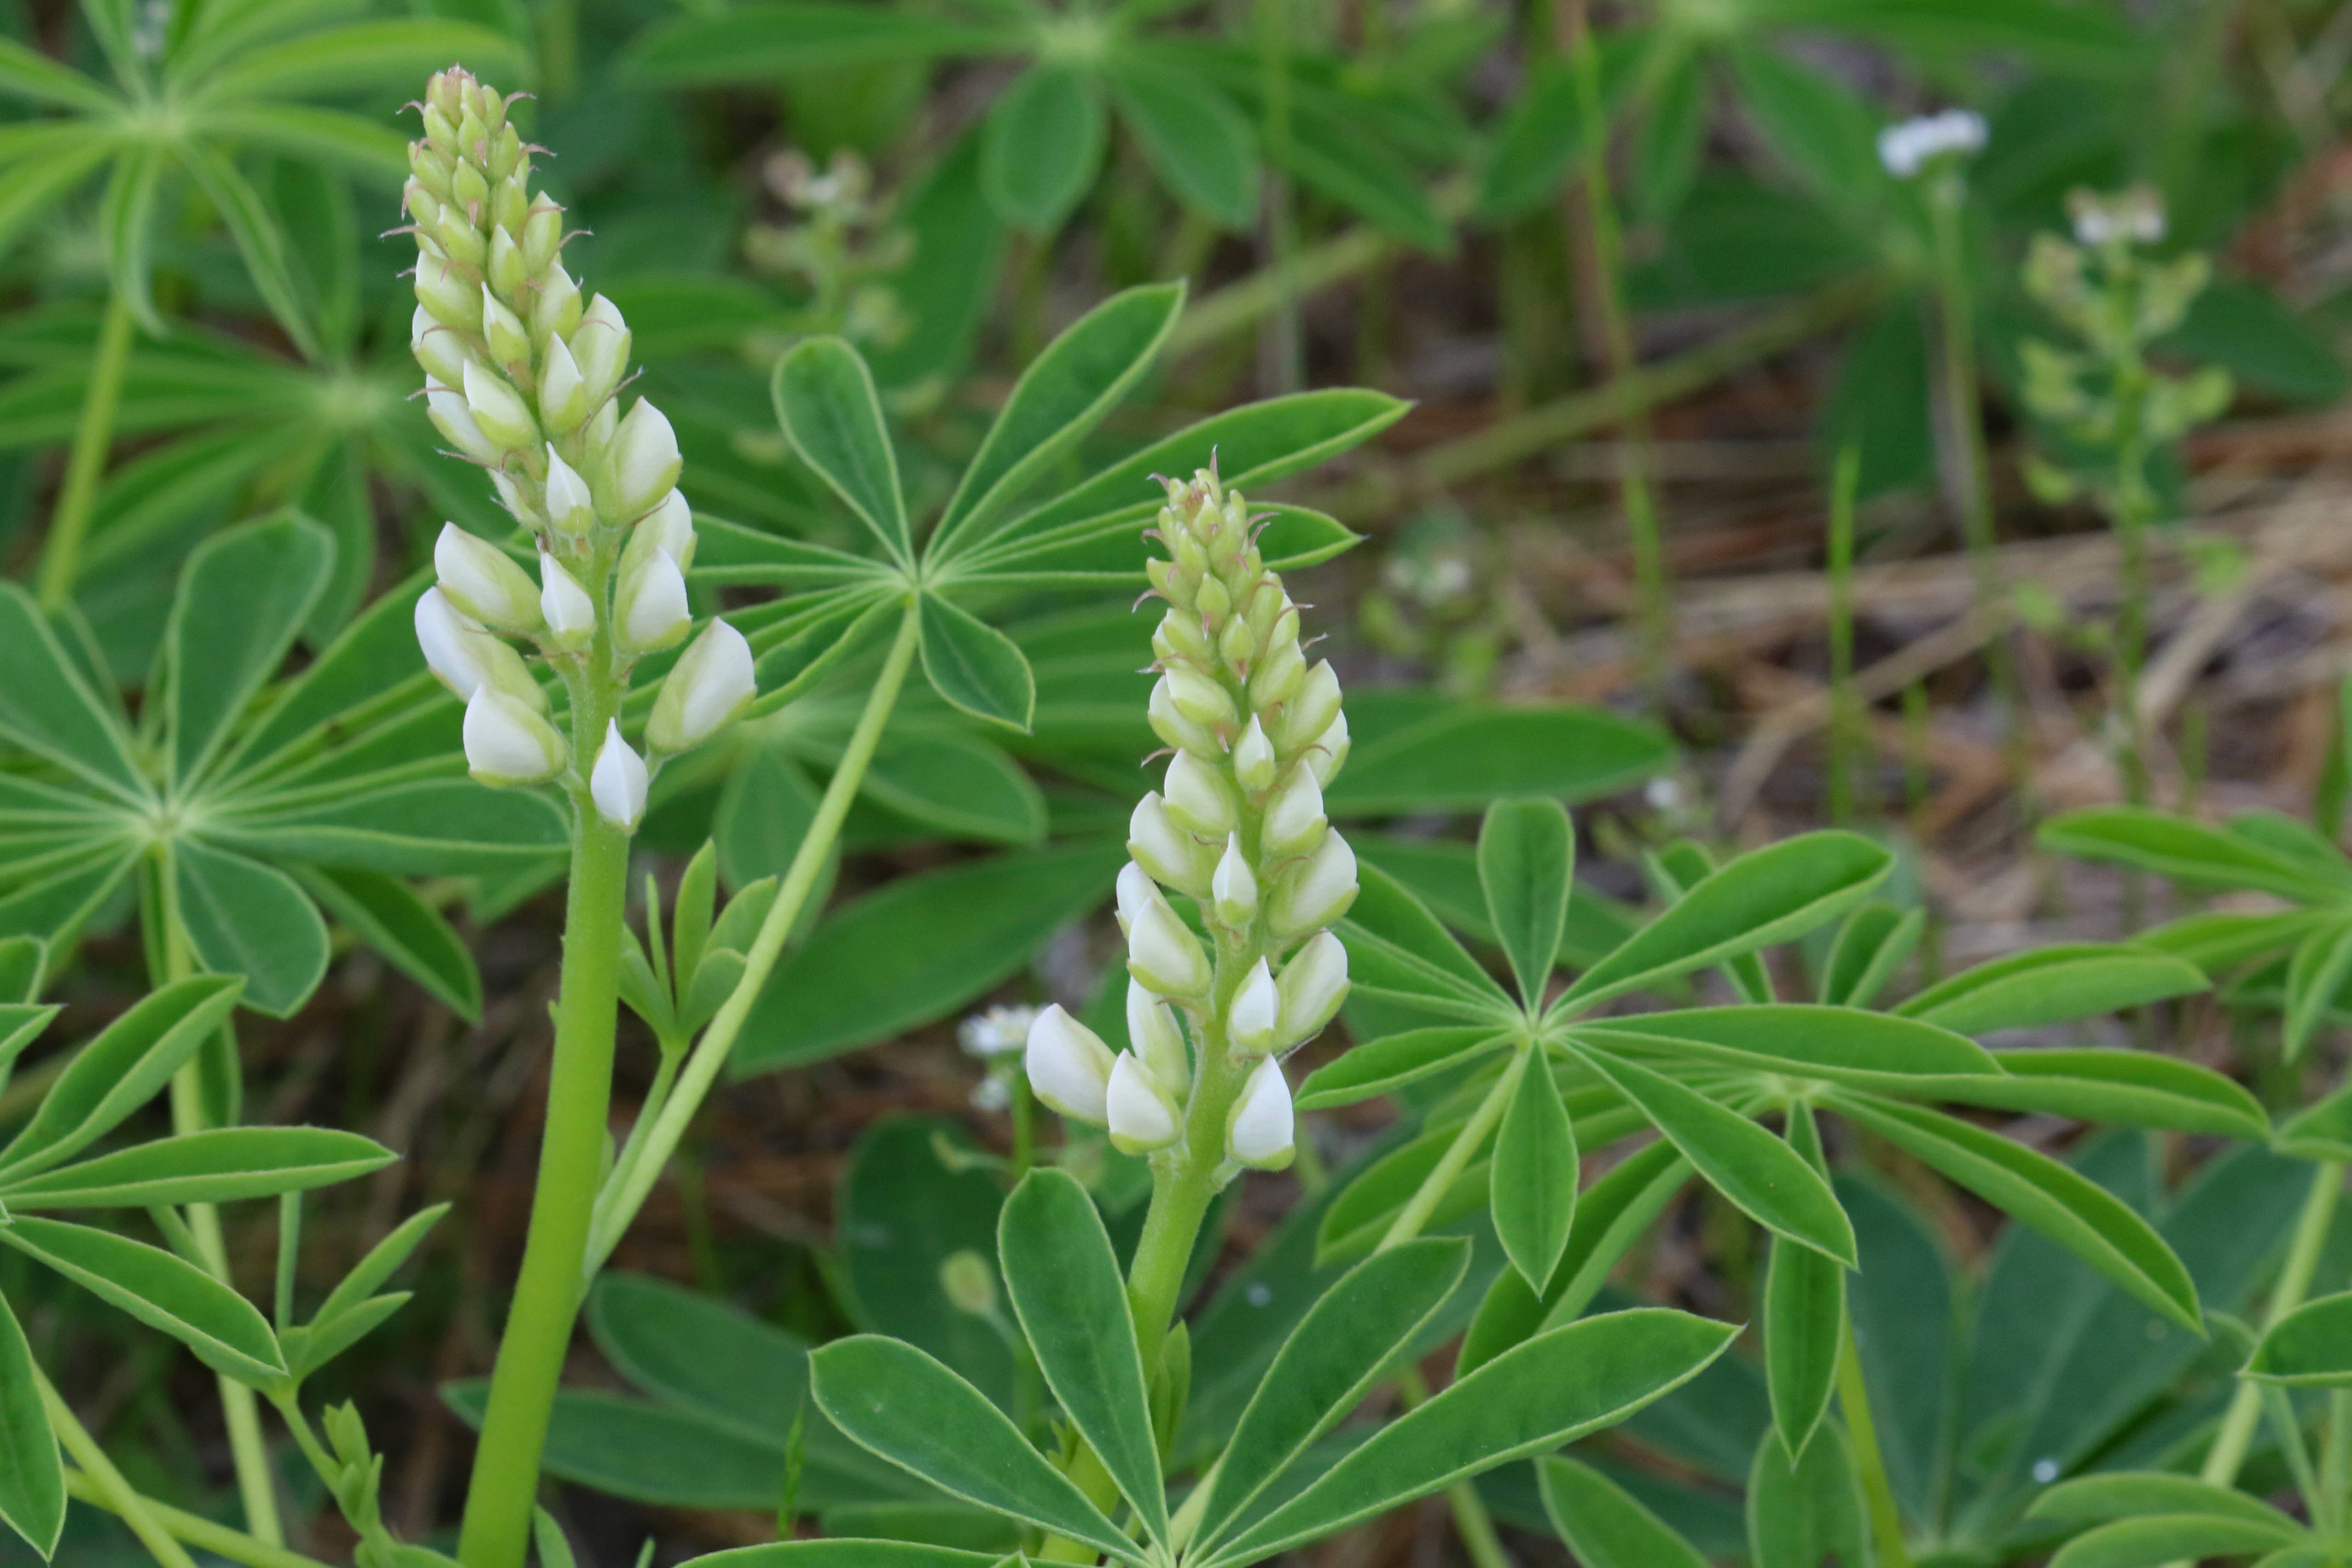 The Scientific Name is Lupinus perennis ssp. perennis. You will likely hear them called Northern Sundial Lupine. This picture shows the The great majority of Lupinus perennis blossoms are pale to deep purple.  These white flowered plants caught my eye. of Lupinus perennis ssp. perennis